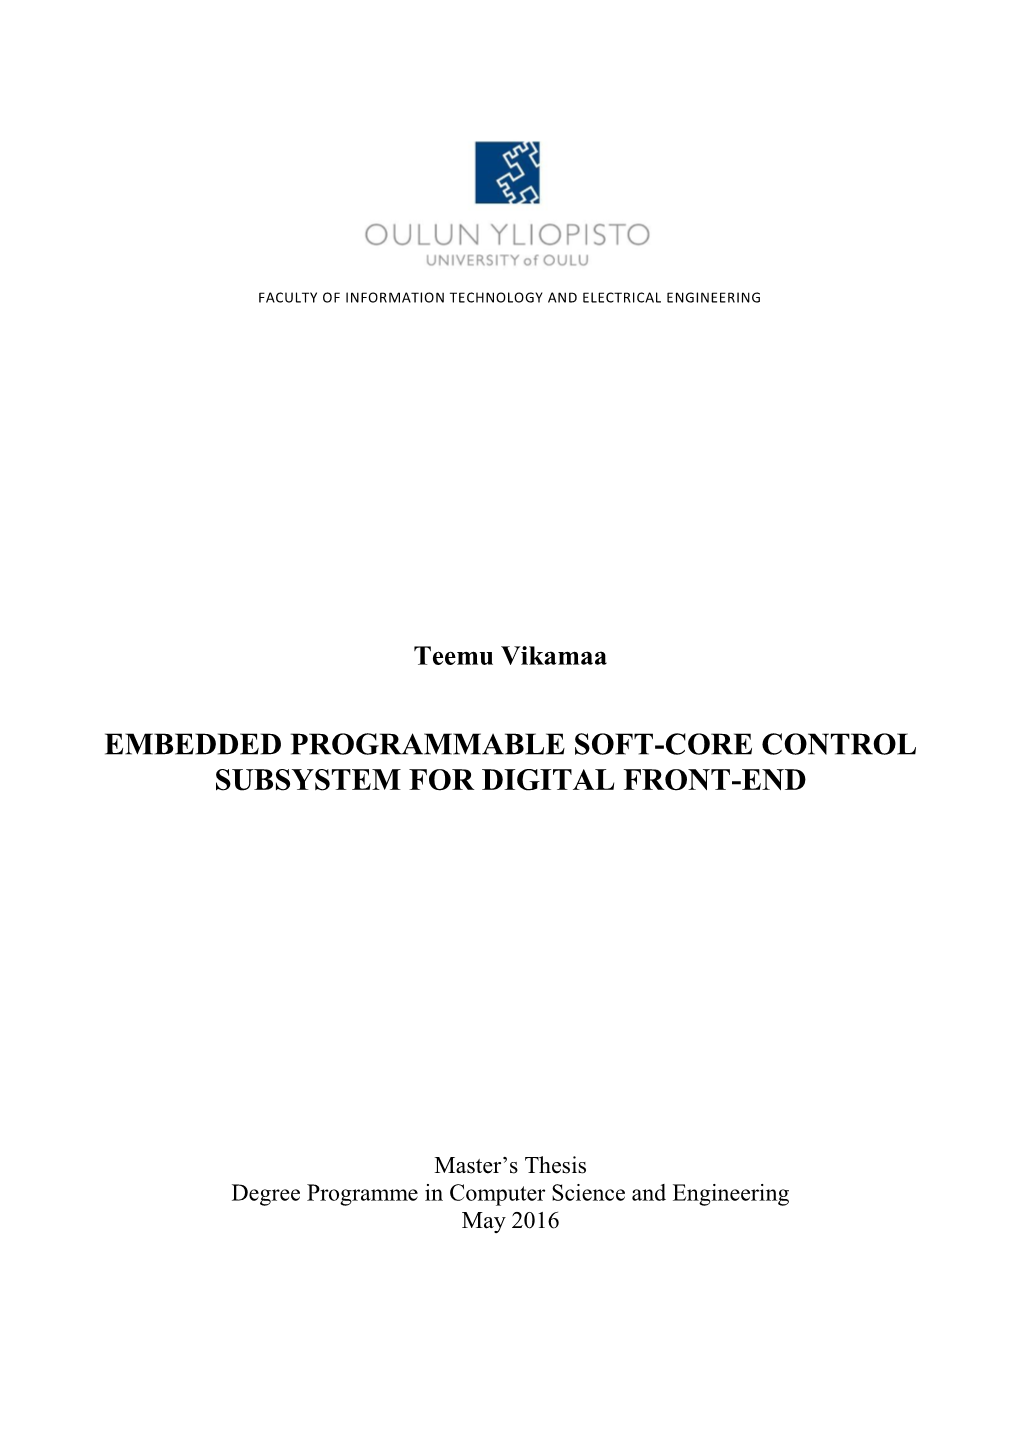 Embedded Programmable Soft-Core Control Subsystem for Digital Front-End